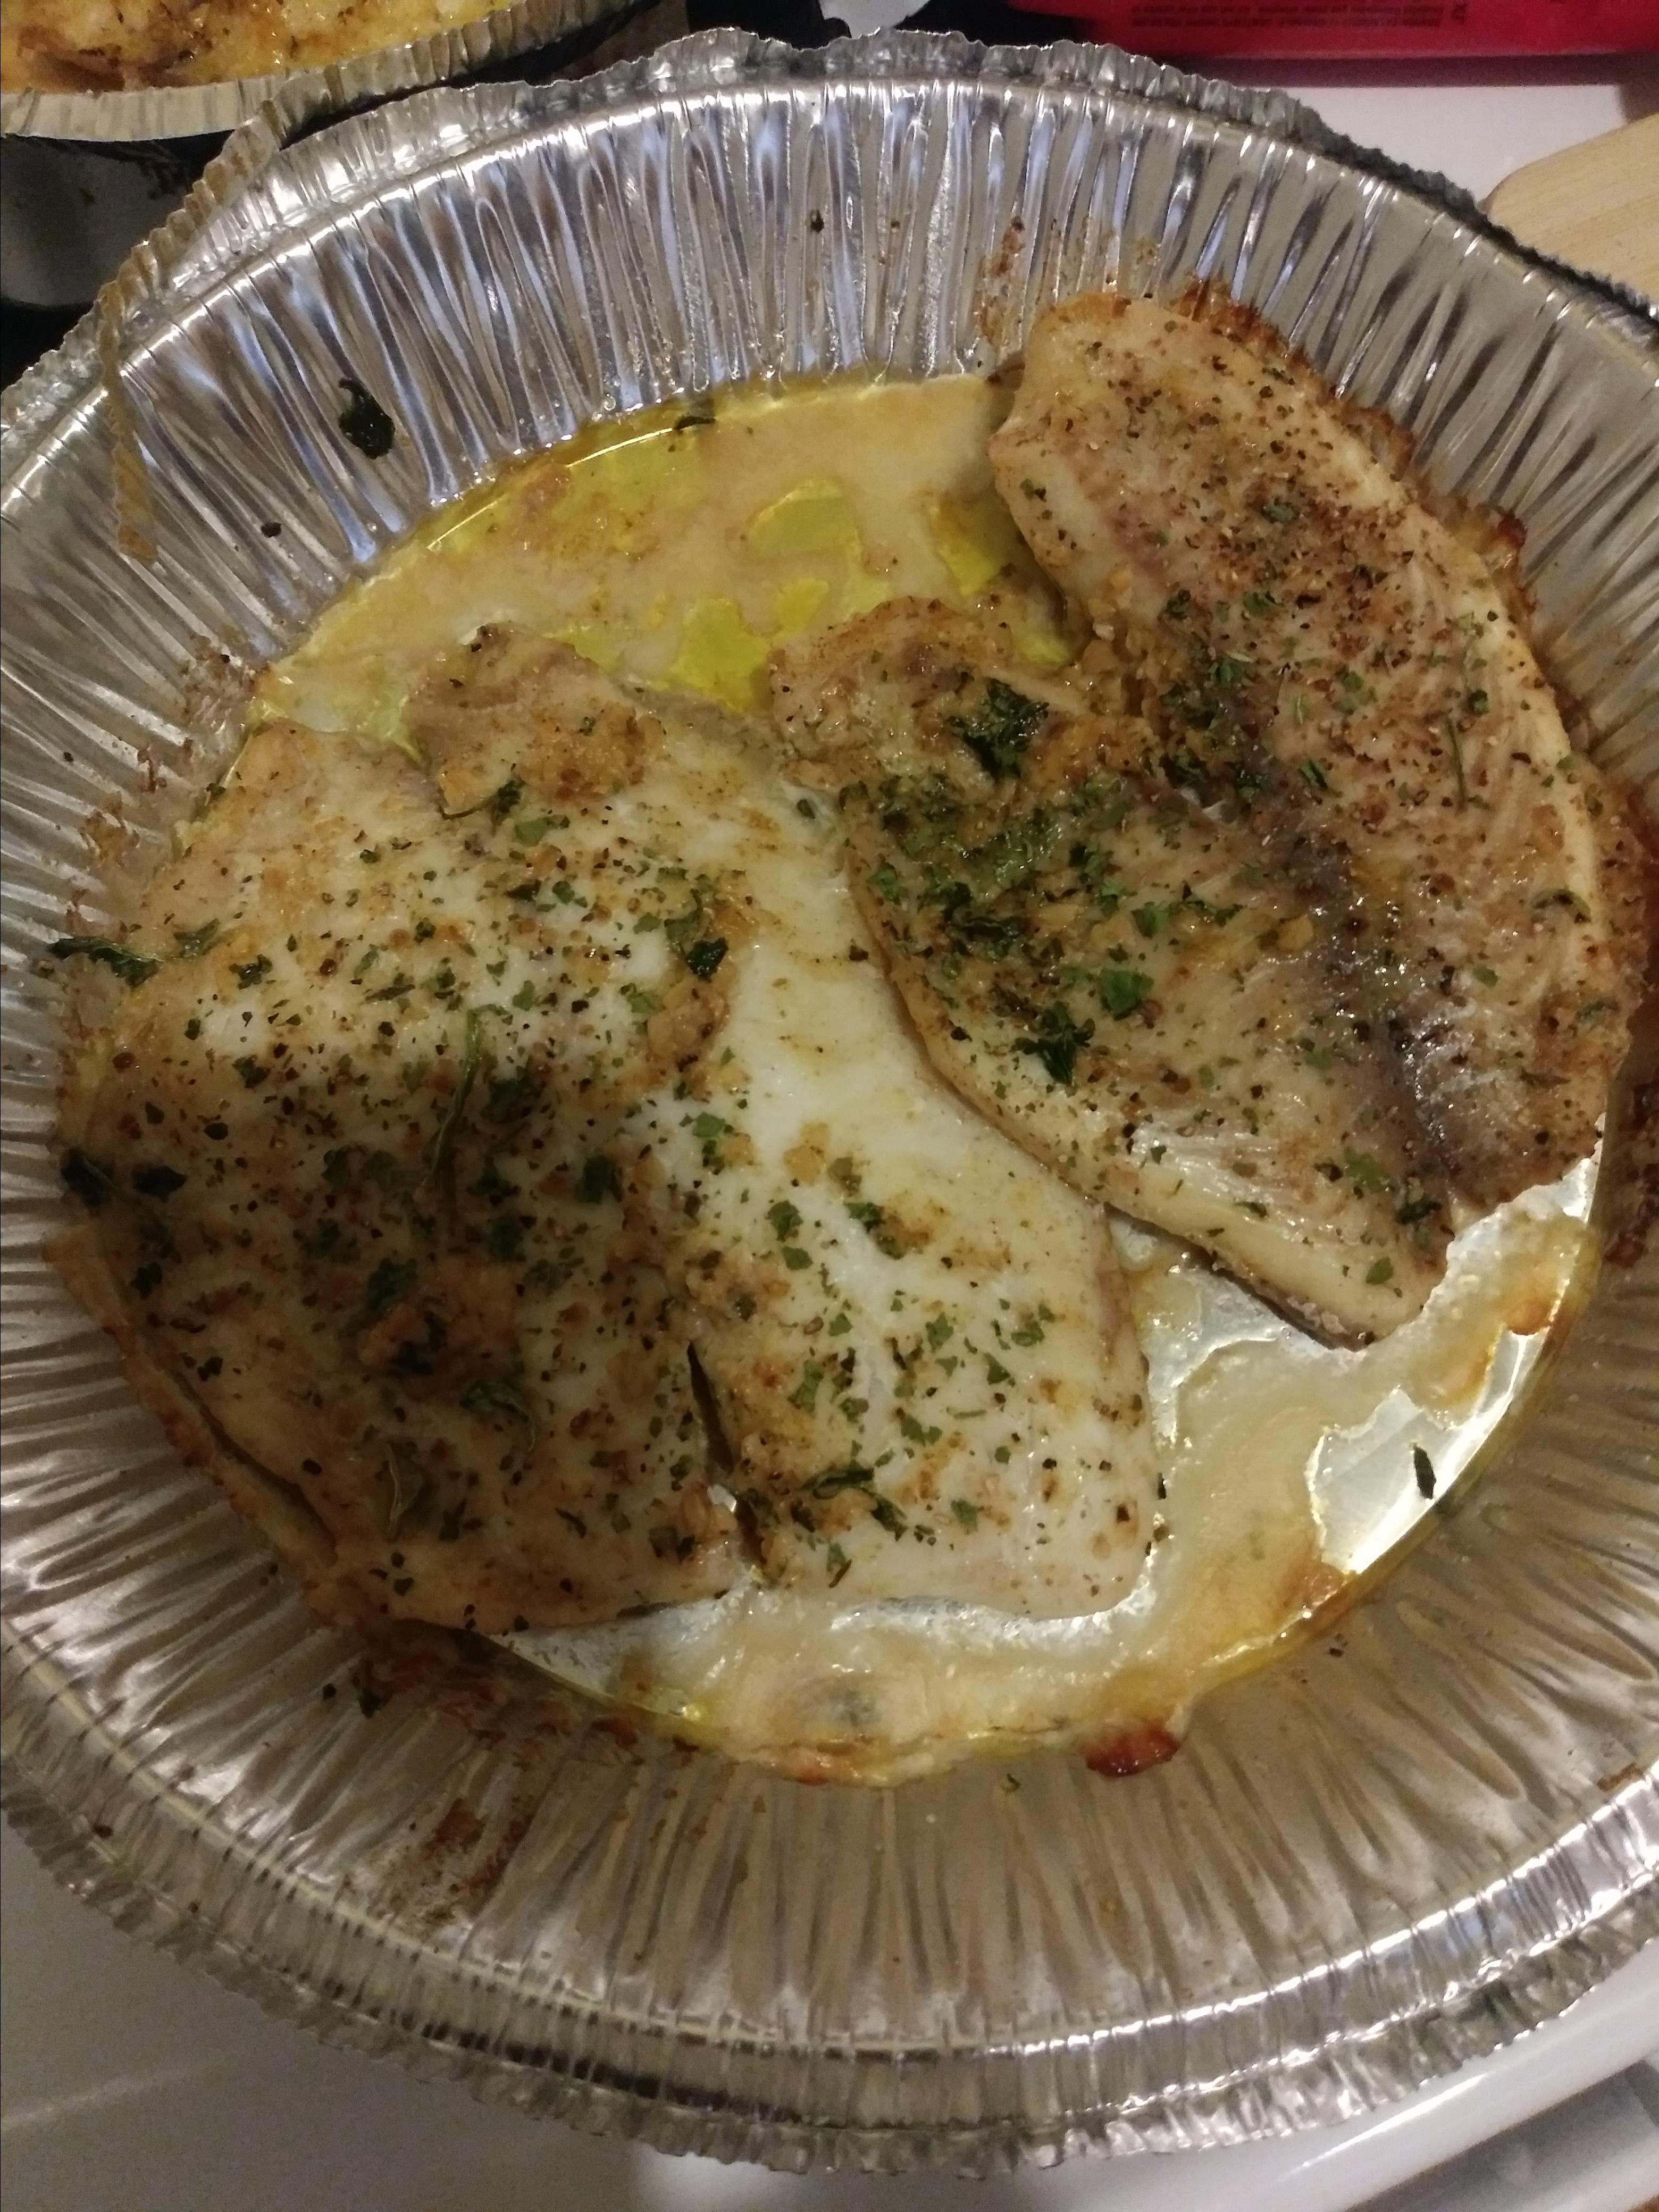 Herb Crusted Tilapia with Garlic Butter